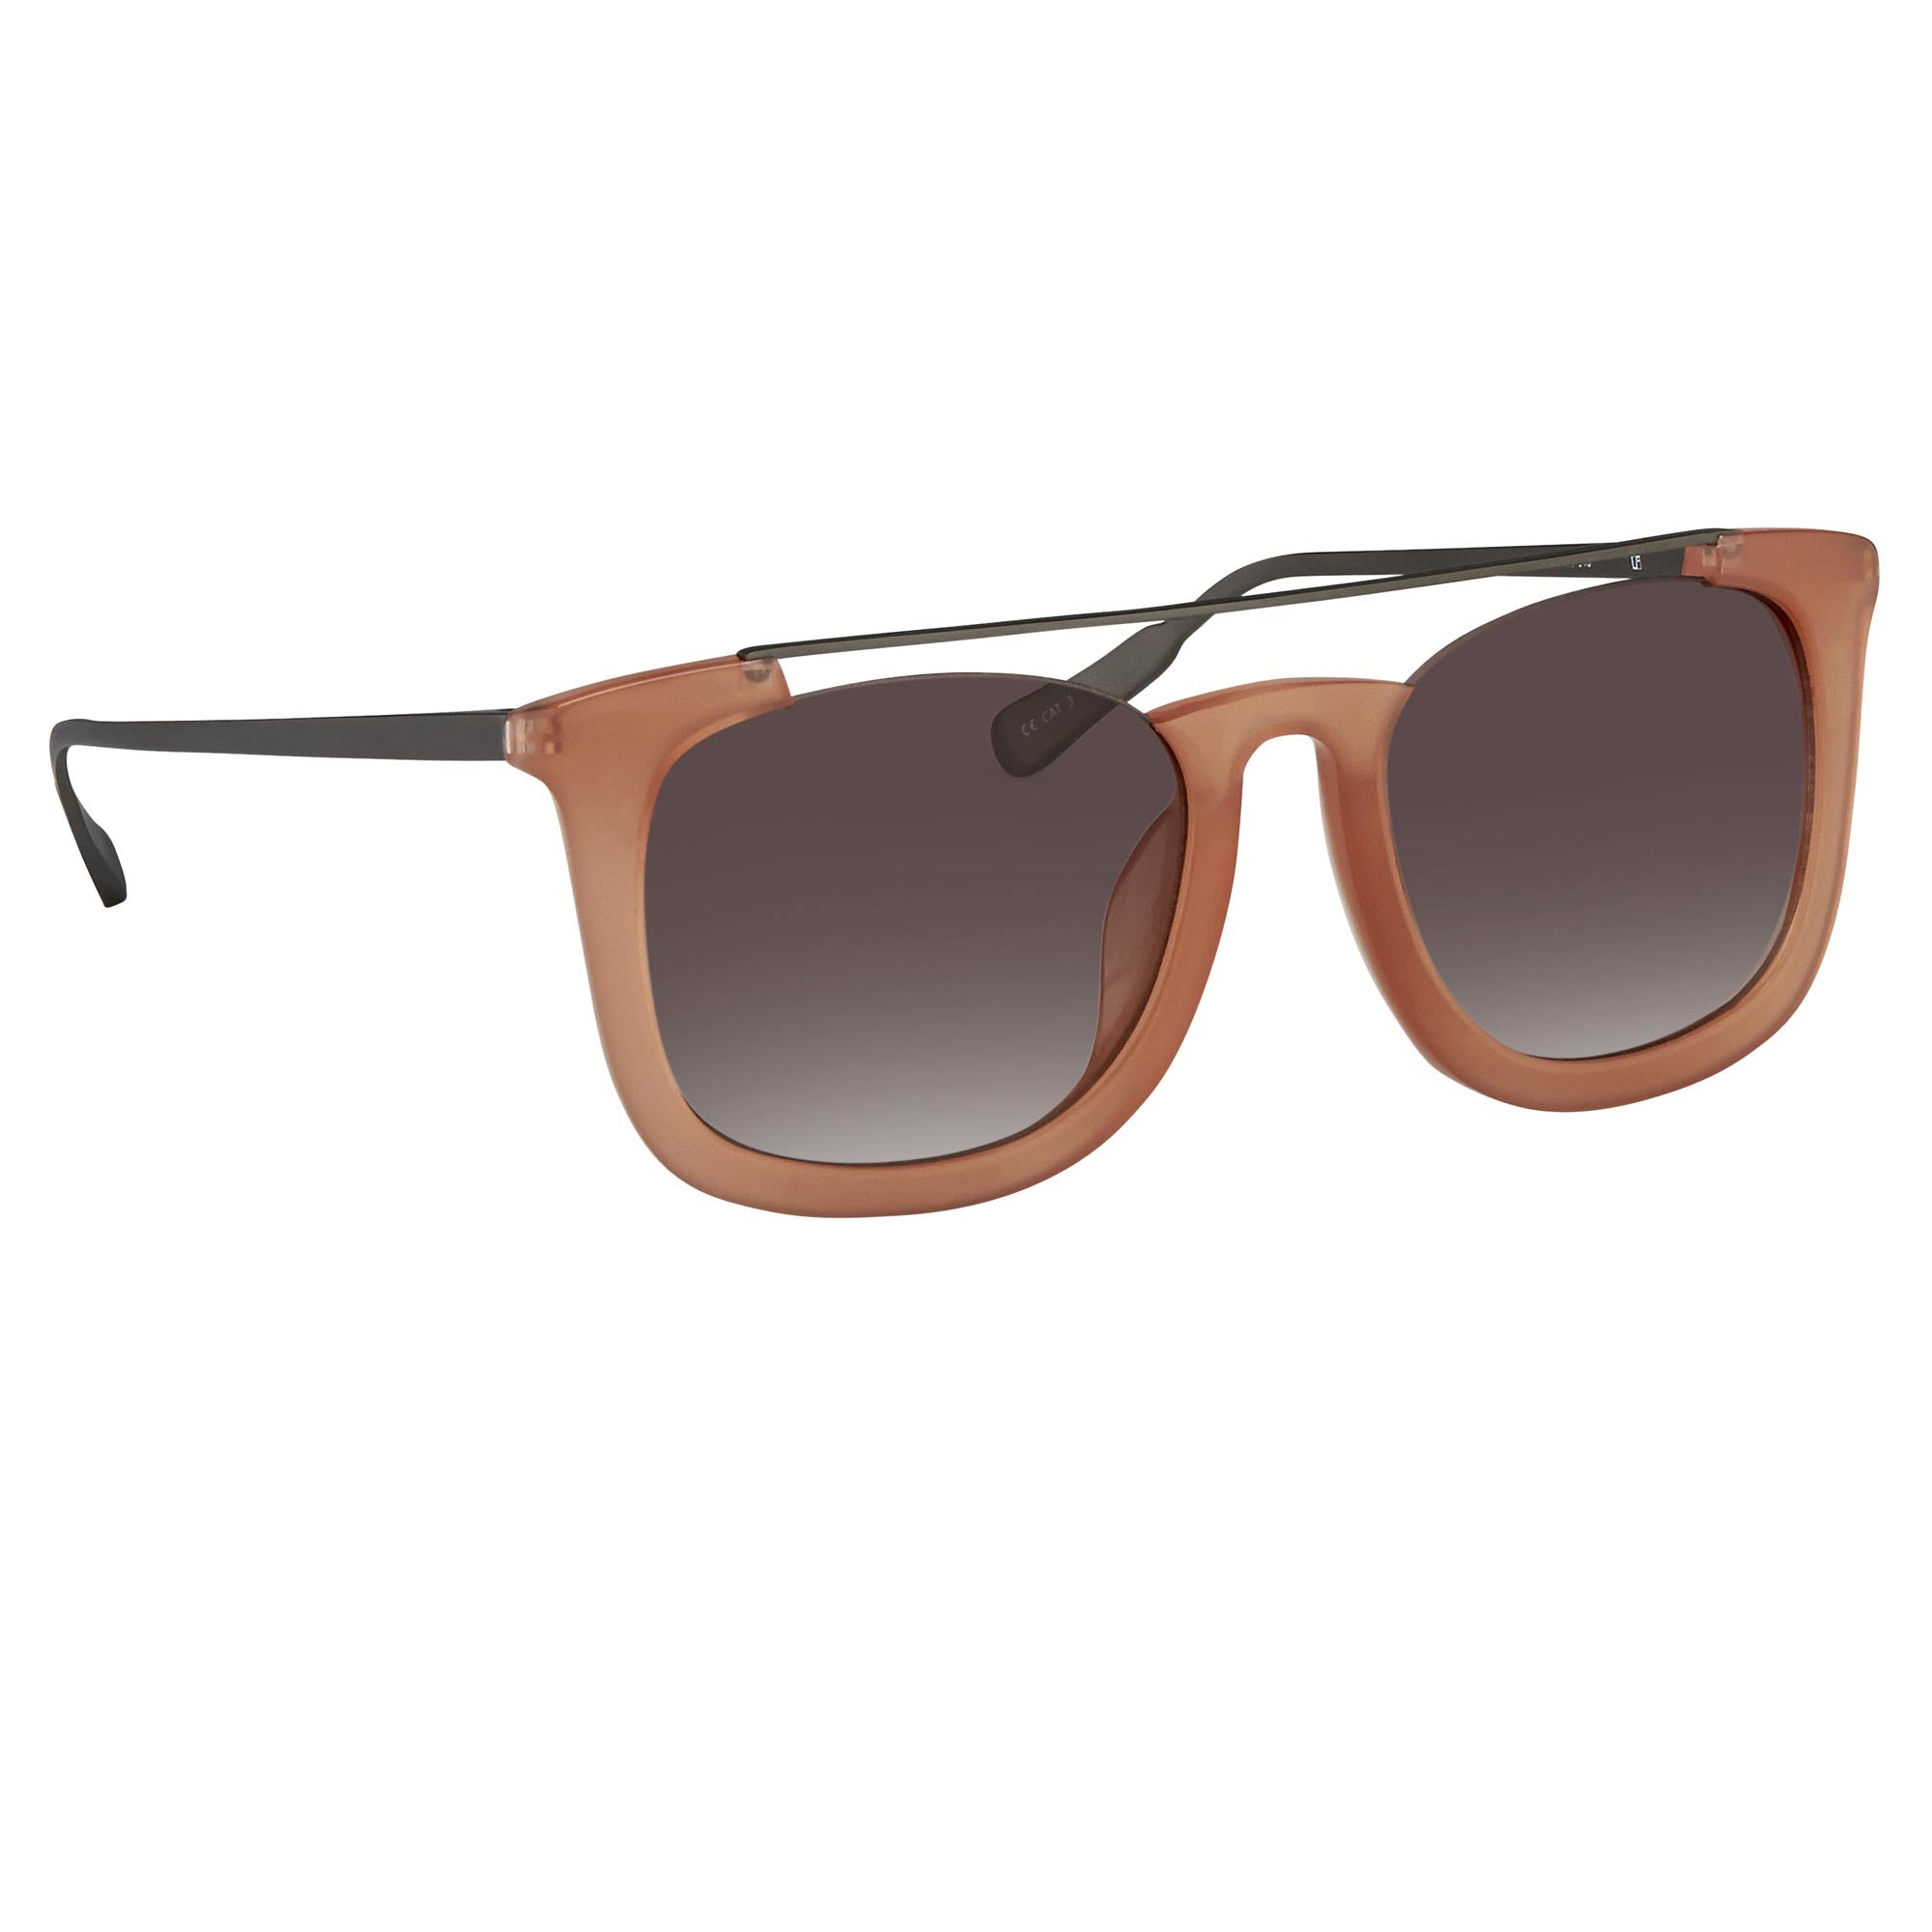 Kris Van Assche Unisex Sunglasses with D-Frame Orange with Brown Graduated Lenses Category 3 - KVA85C3SUN - Watches & Crystals